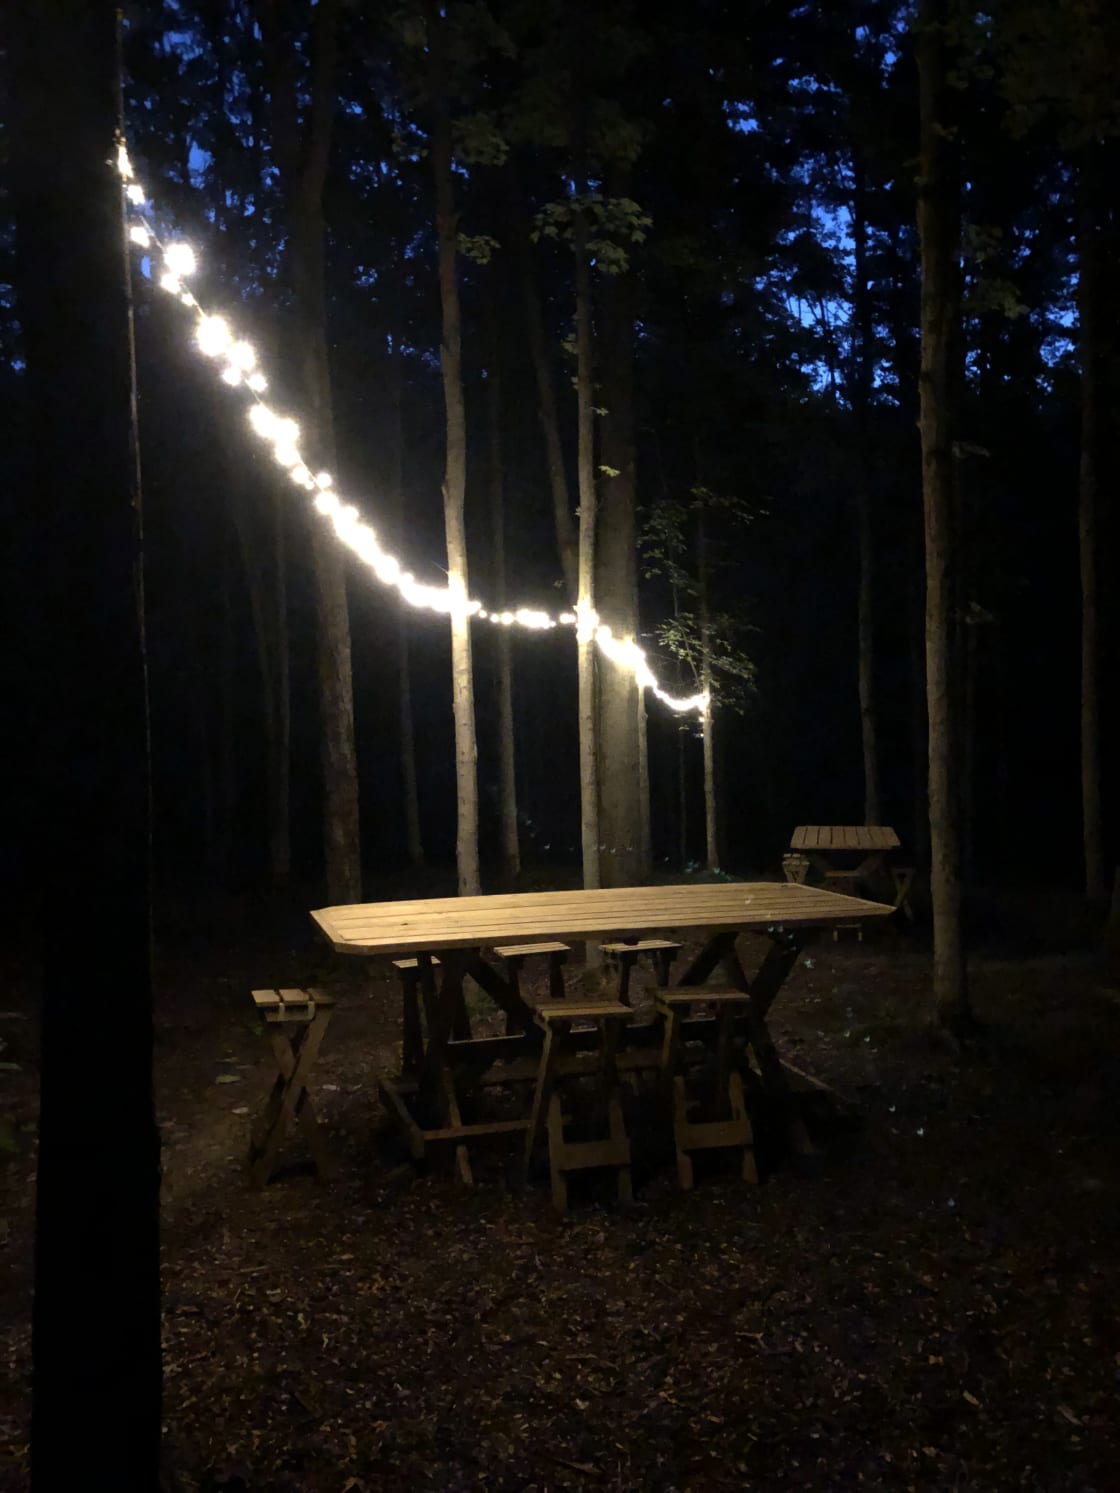 Solar powered lights are above the tables